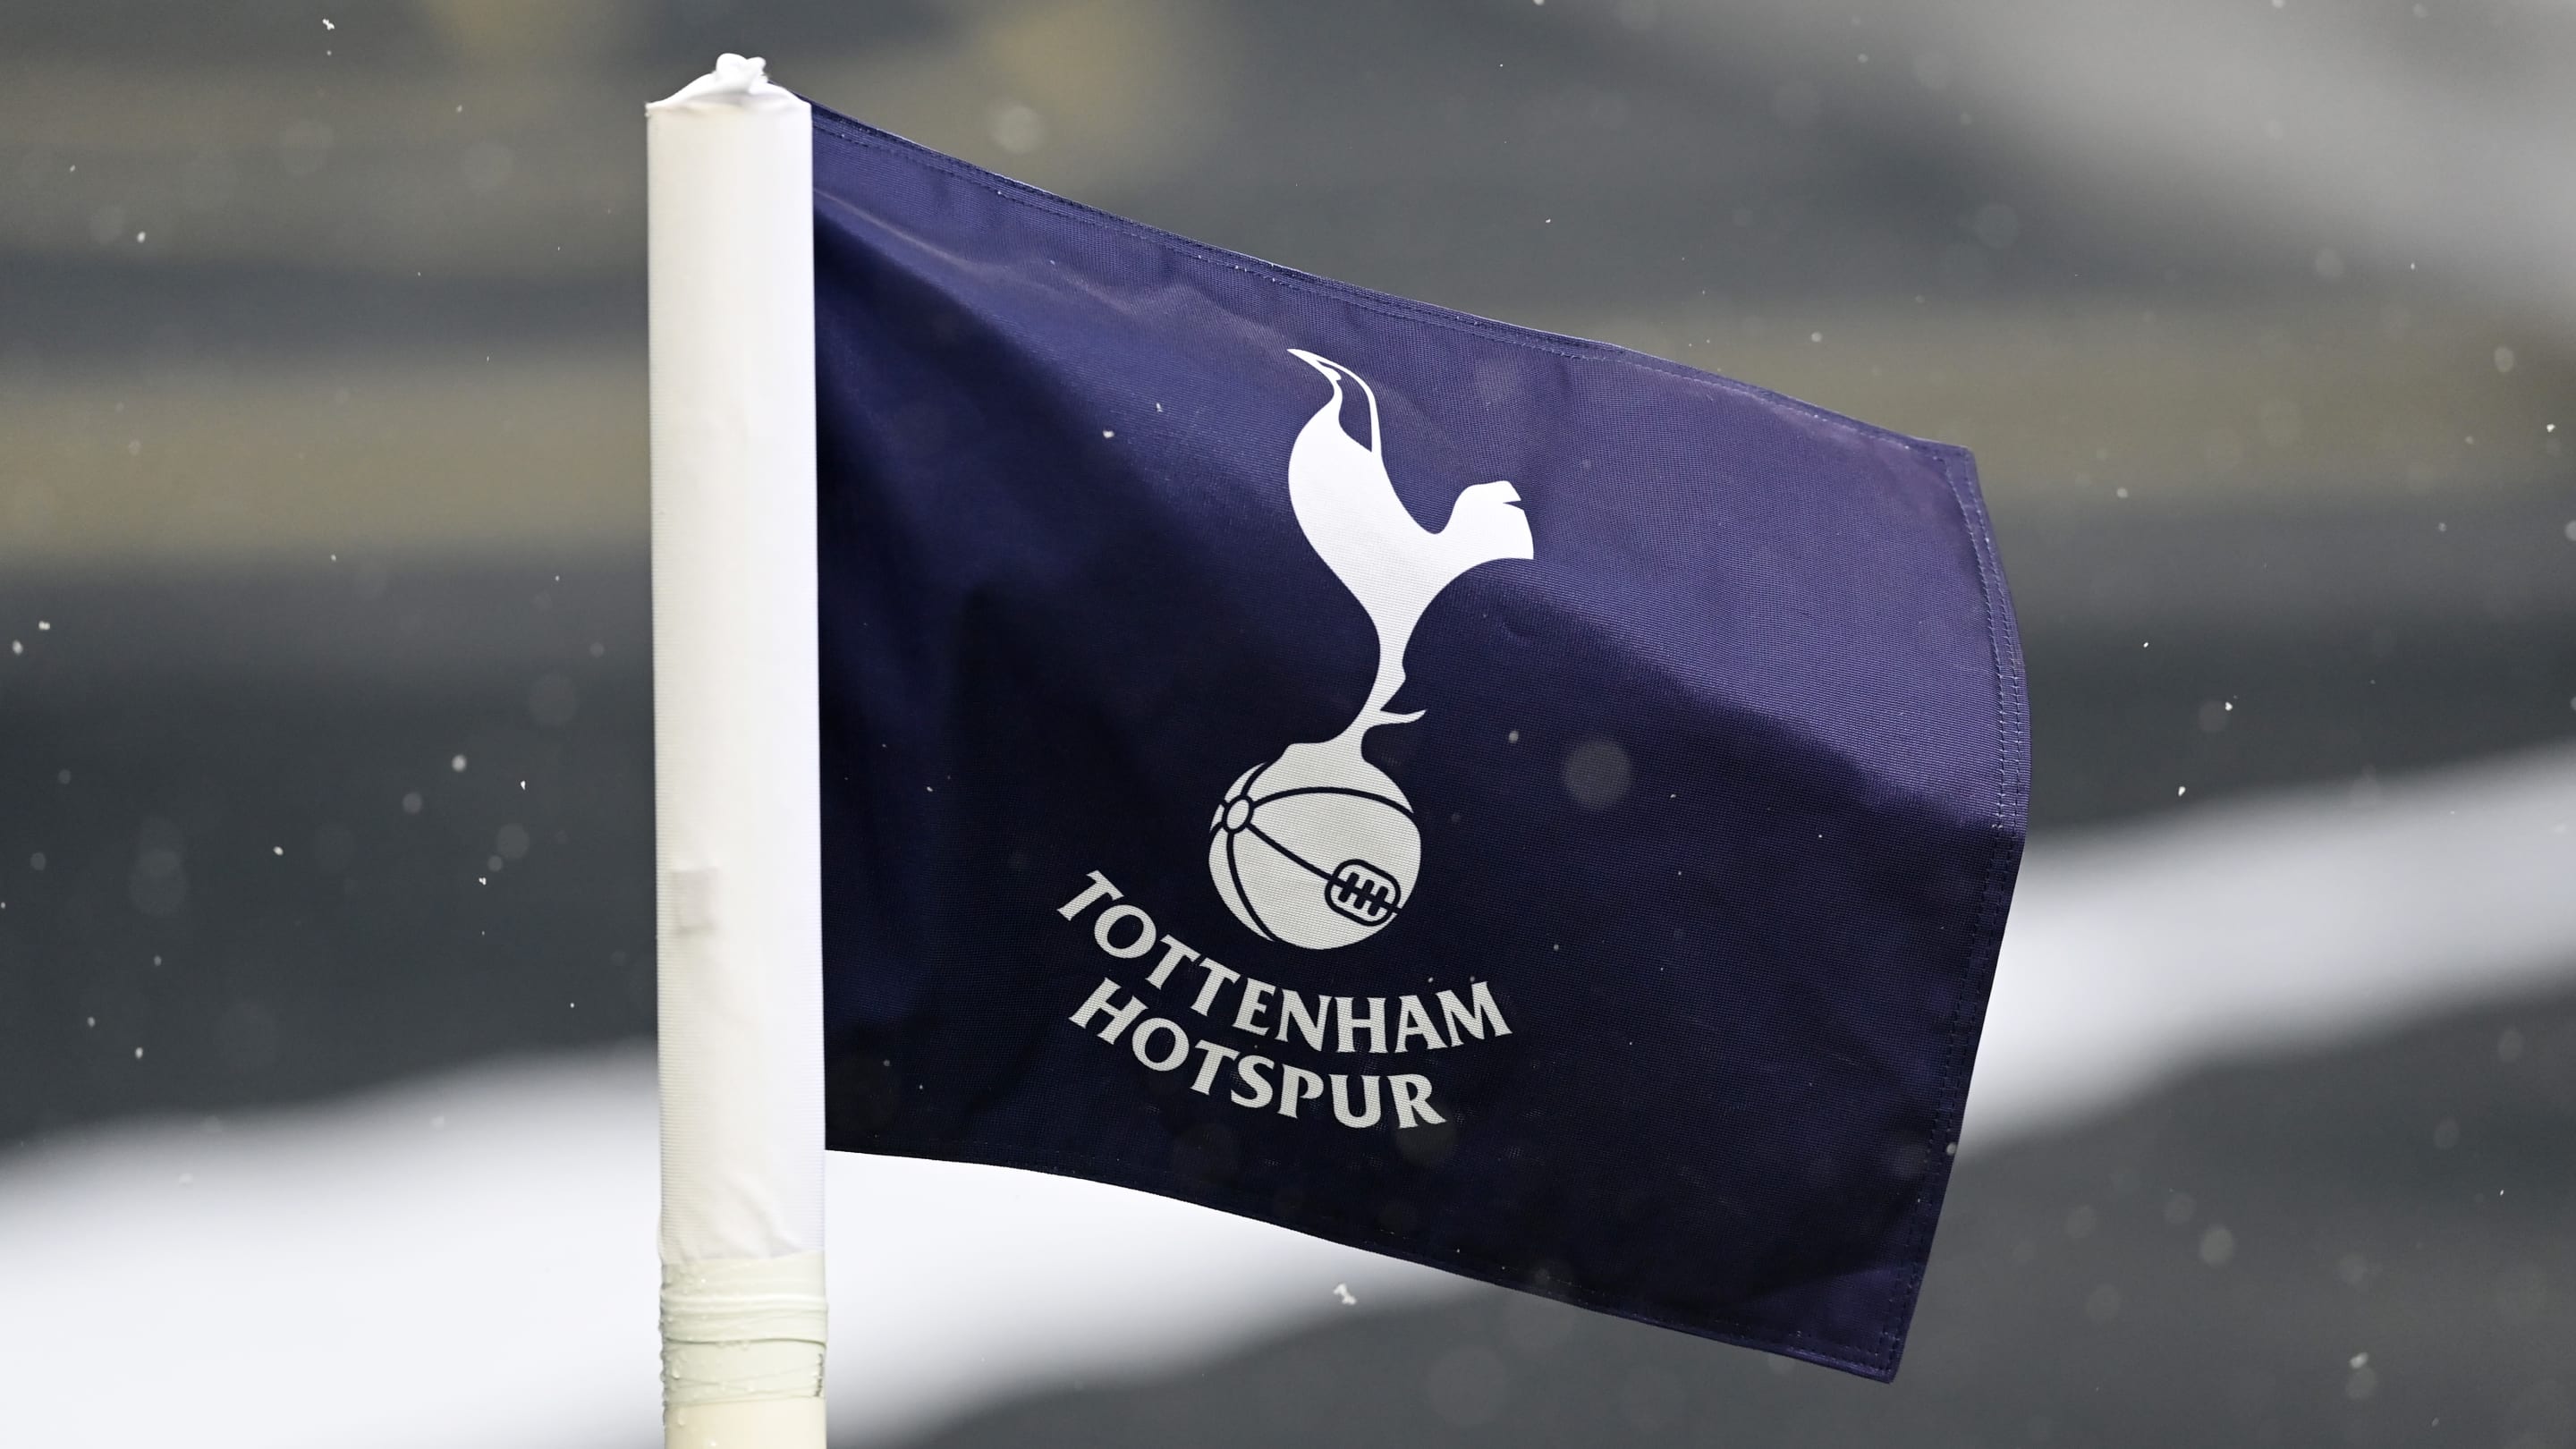 Tottenham supporters' group 'deeply concerned' over club's new sponsorship deal